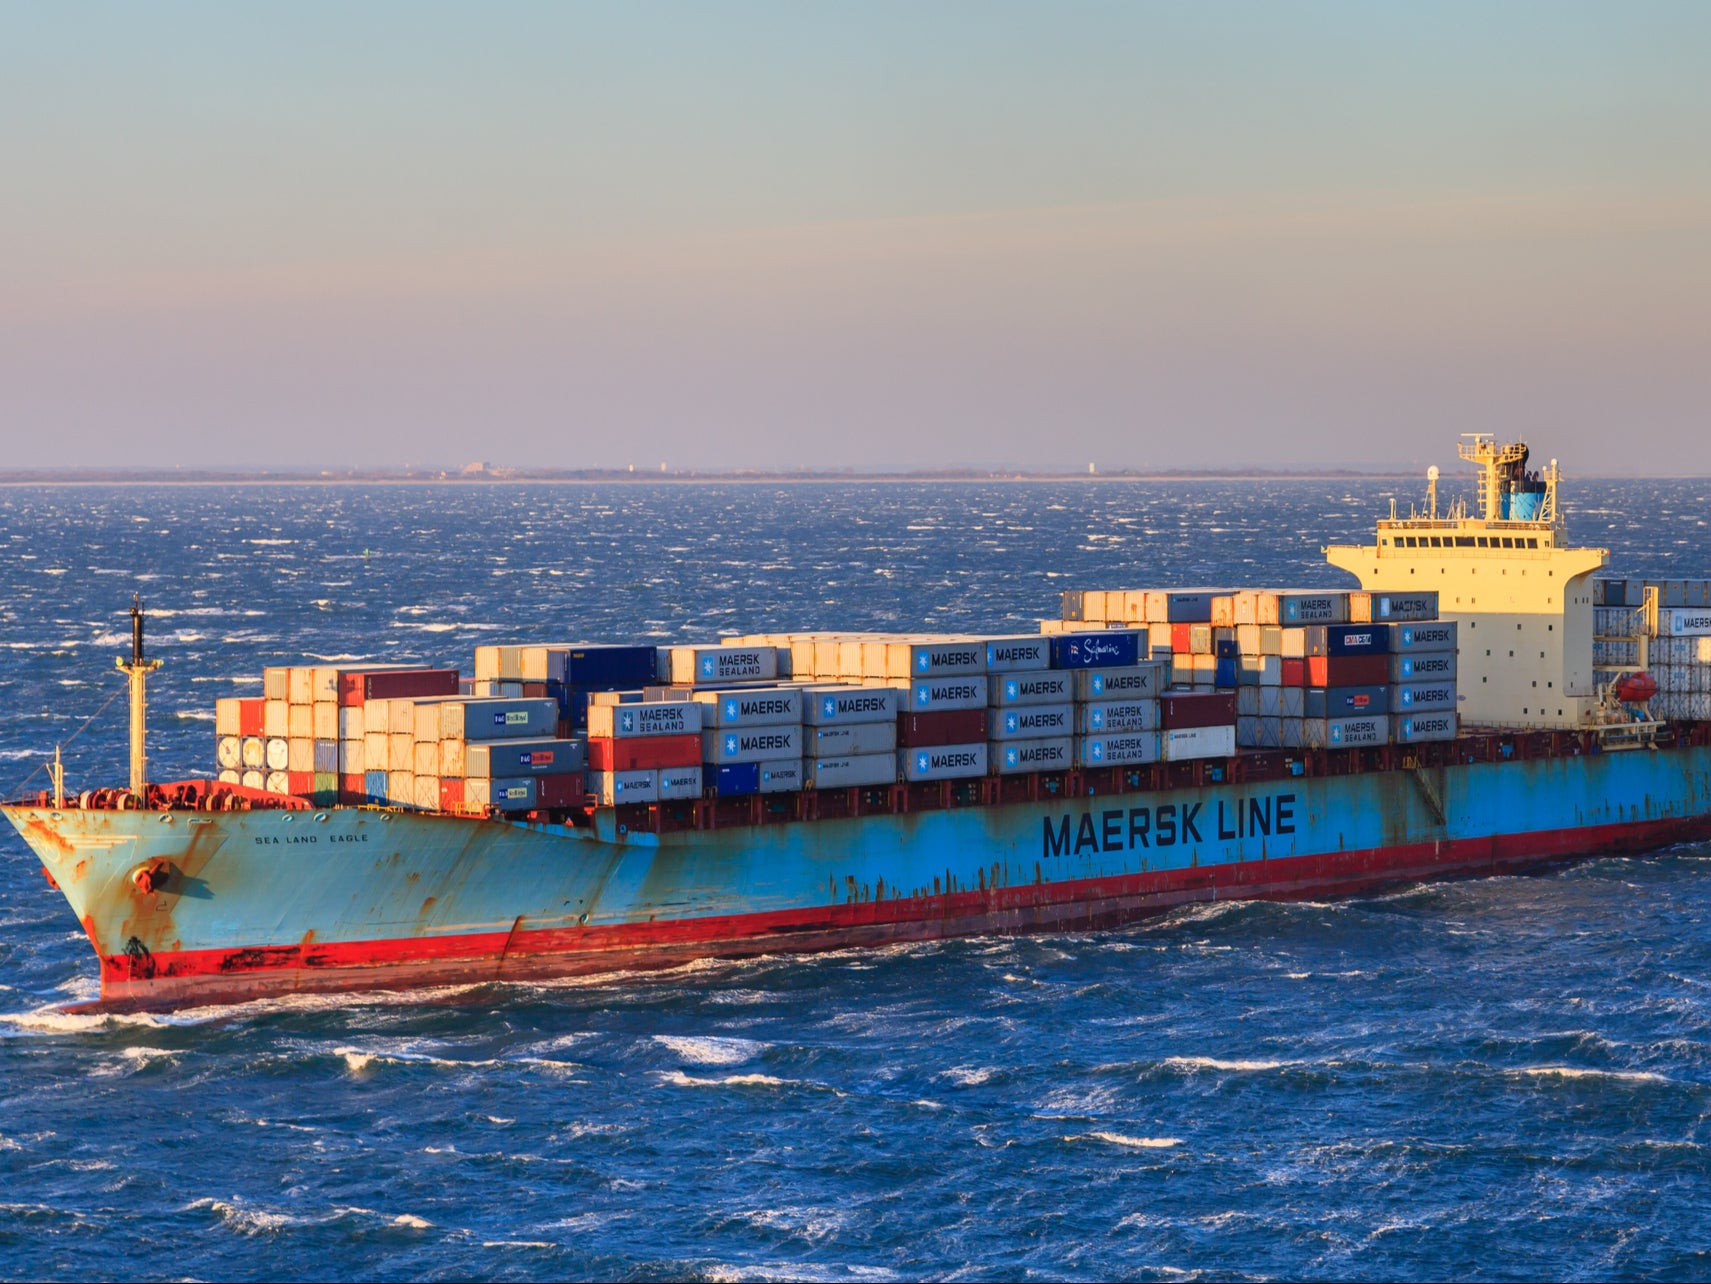 10 TOP CONTAINER SHIPS WORLD'S LARGEST BIGGEST FOSSIL FUELS GIANTS